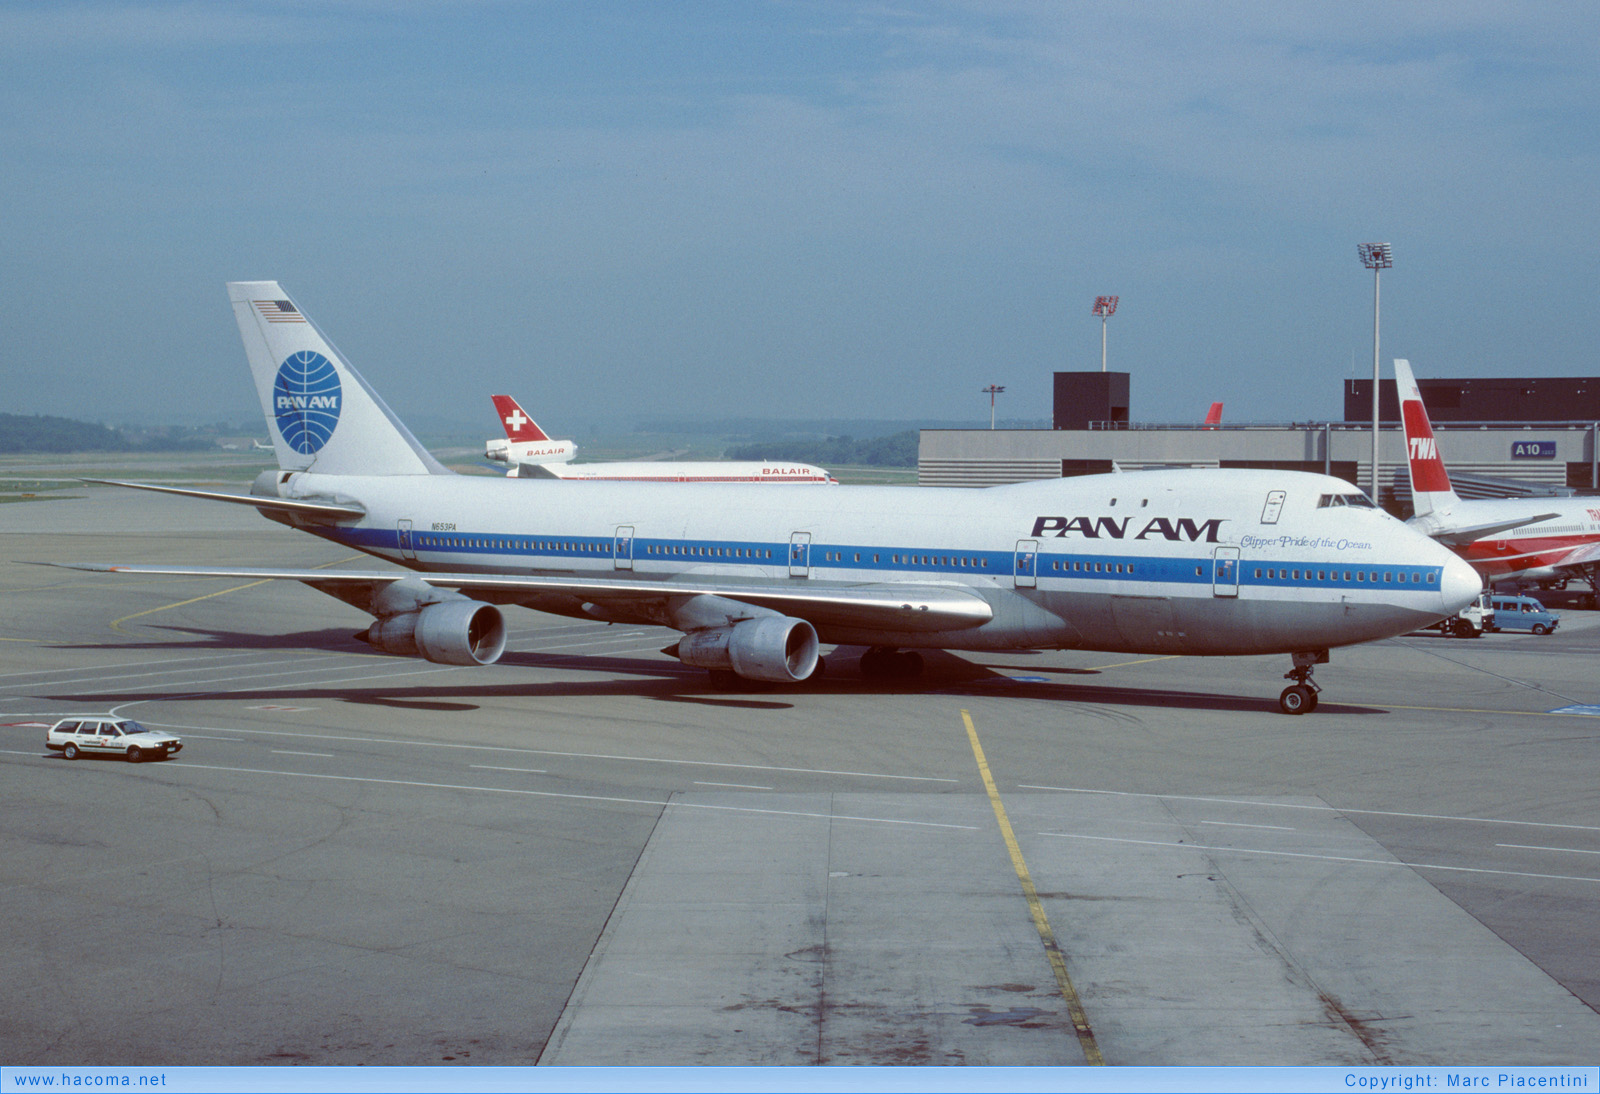 Photo of N653PA - Pan Am Clipper Unity / Pride of the Ocean - Zurich International Airport - Aug 25, 1988